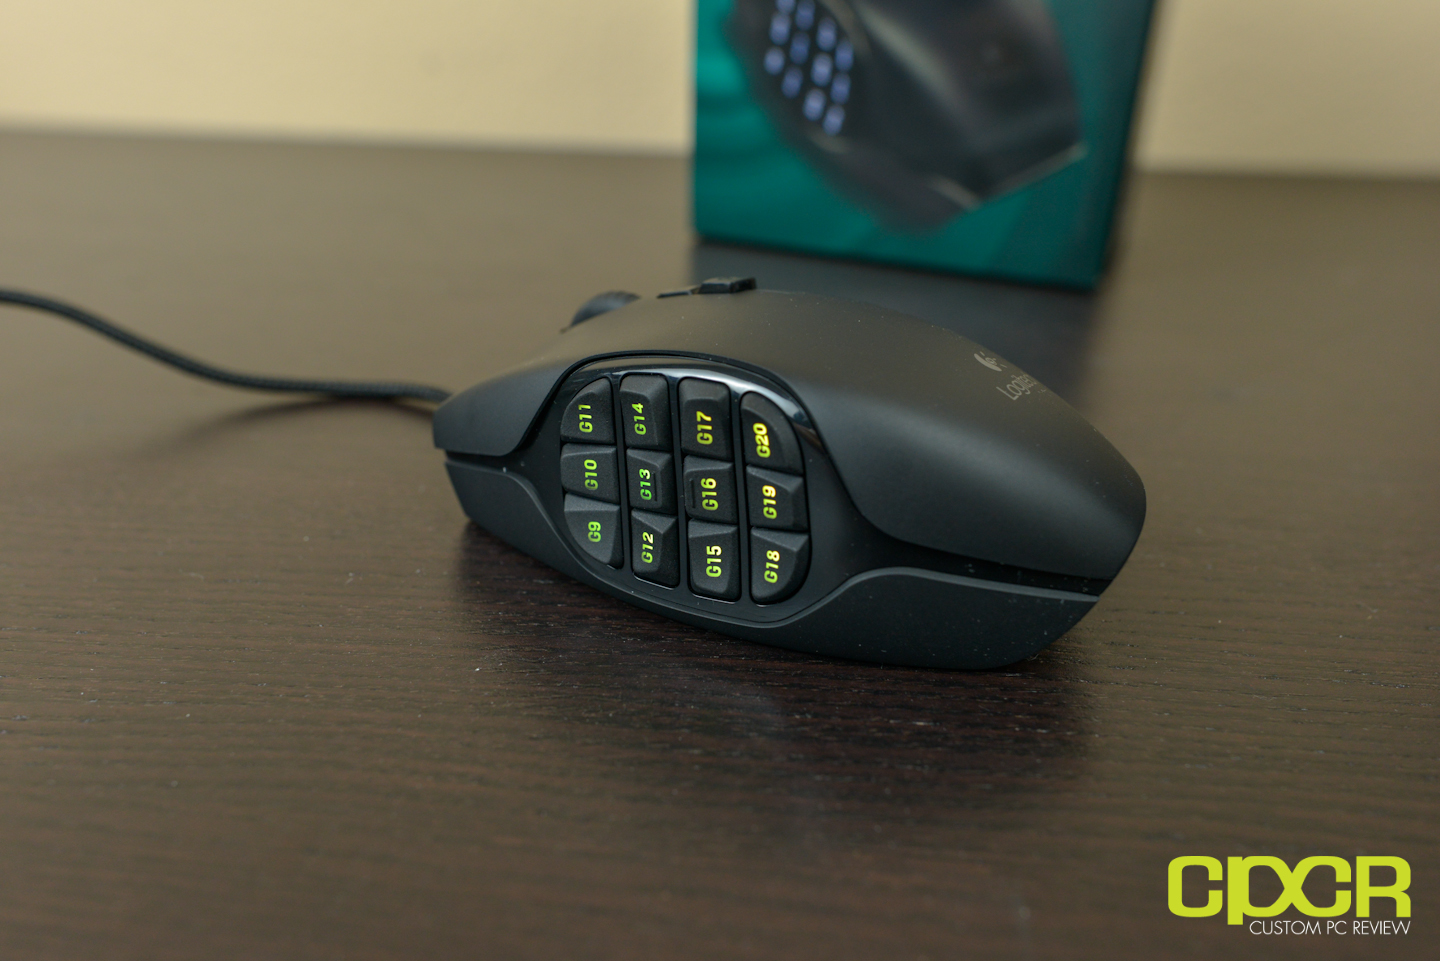 Logitech G600 MMO Gaming Mouse 